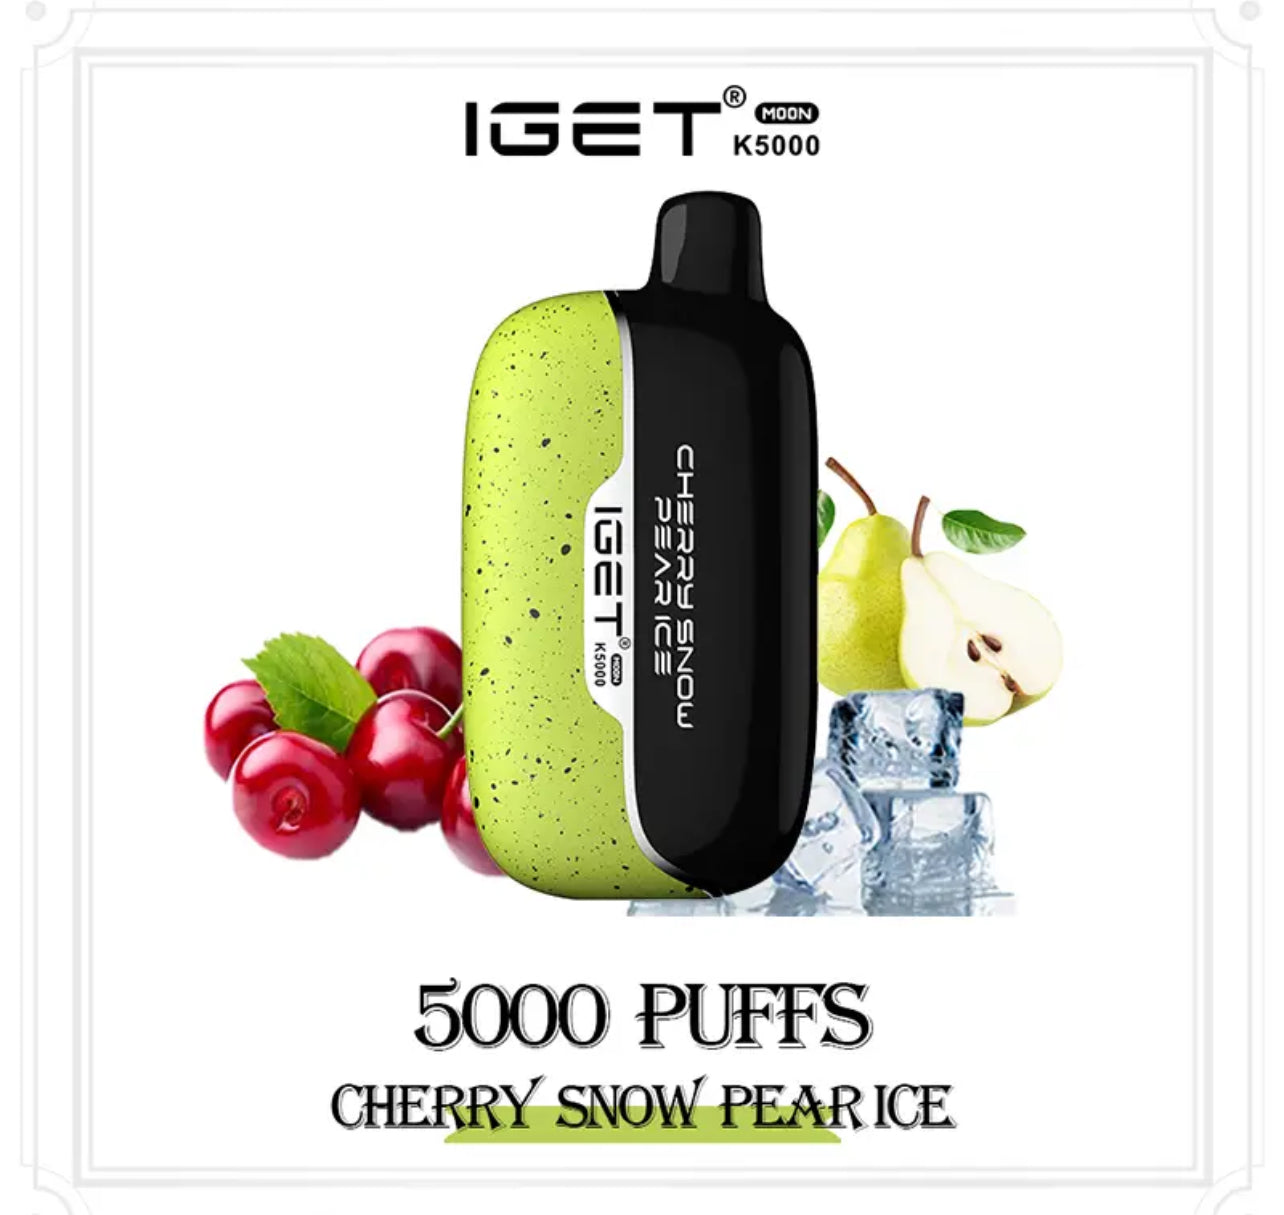 IGET MOON CHERRY SNOW PEAR ICE 5000 PUFFS